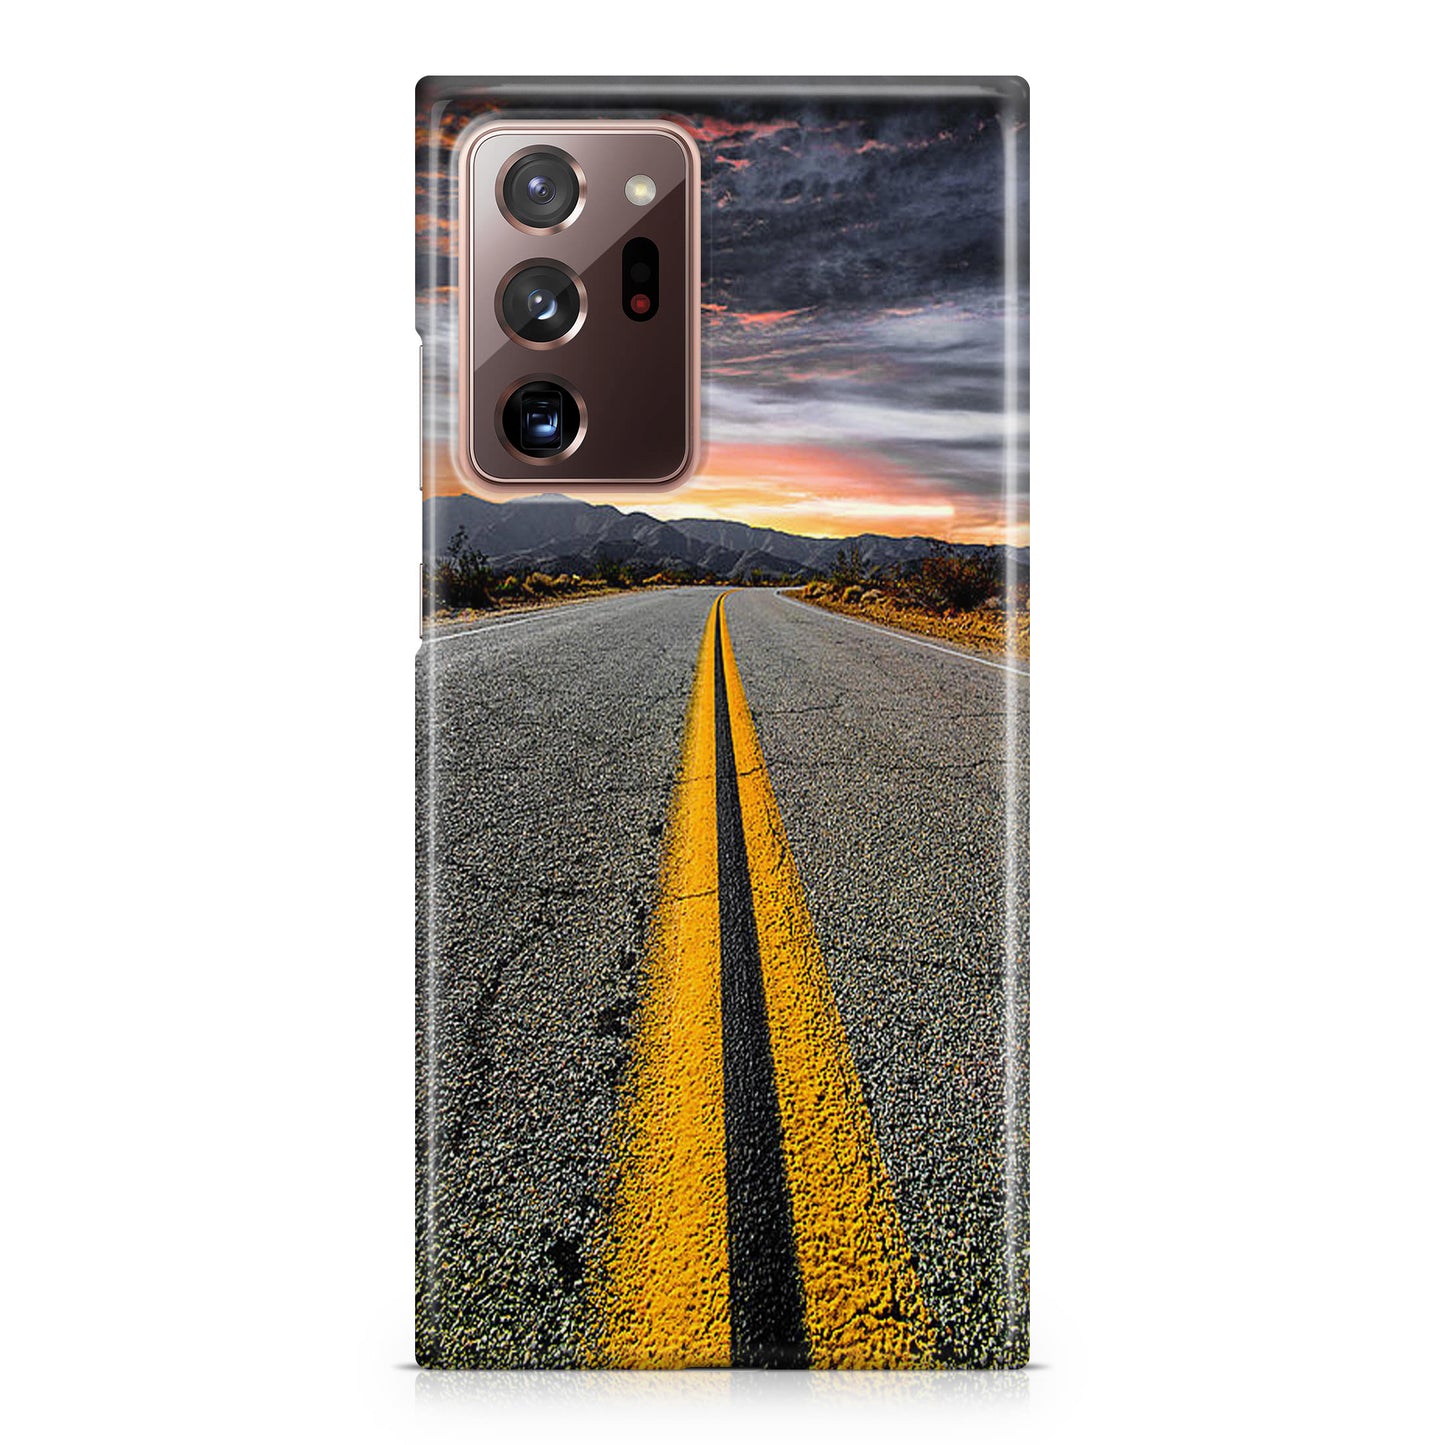 The Way to Home Galaxy Note 20 Ultra Case